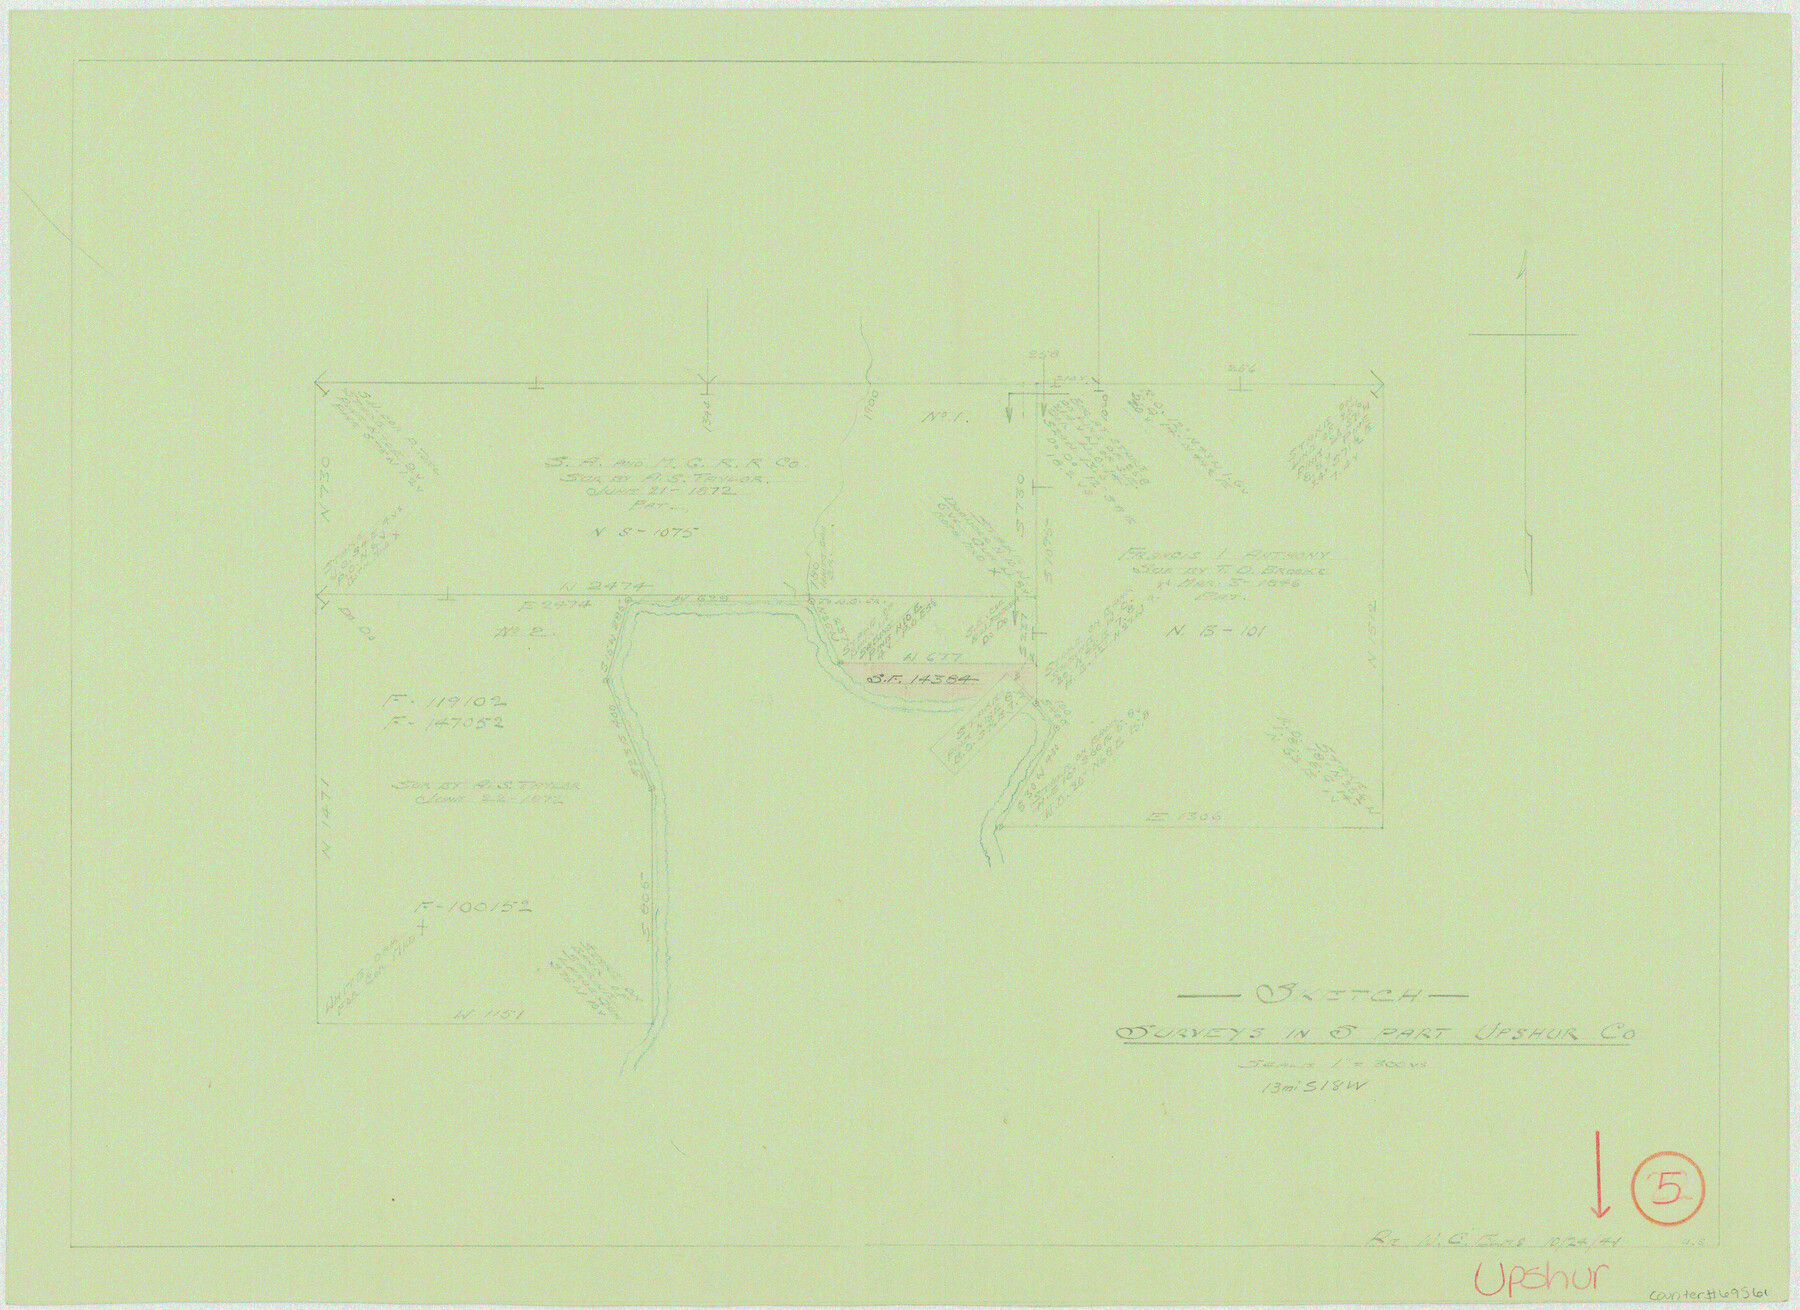 69561, Upshur County Working Sketch 5, General Map Collection